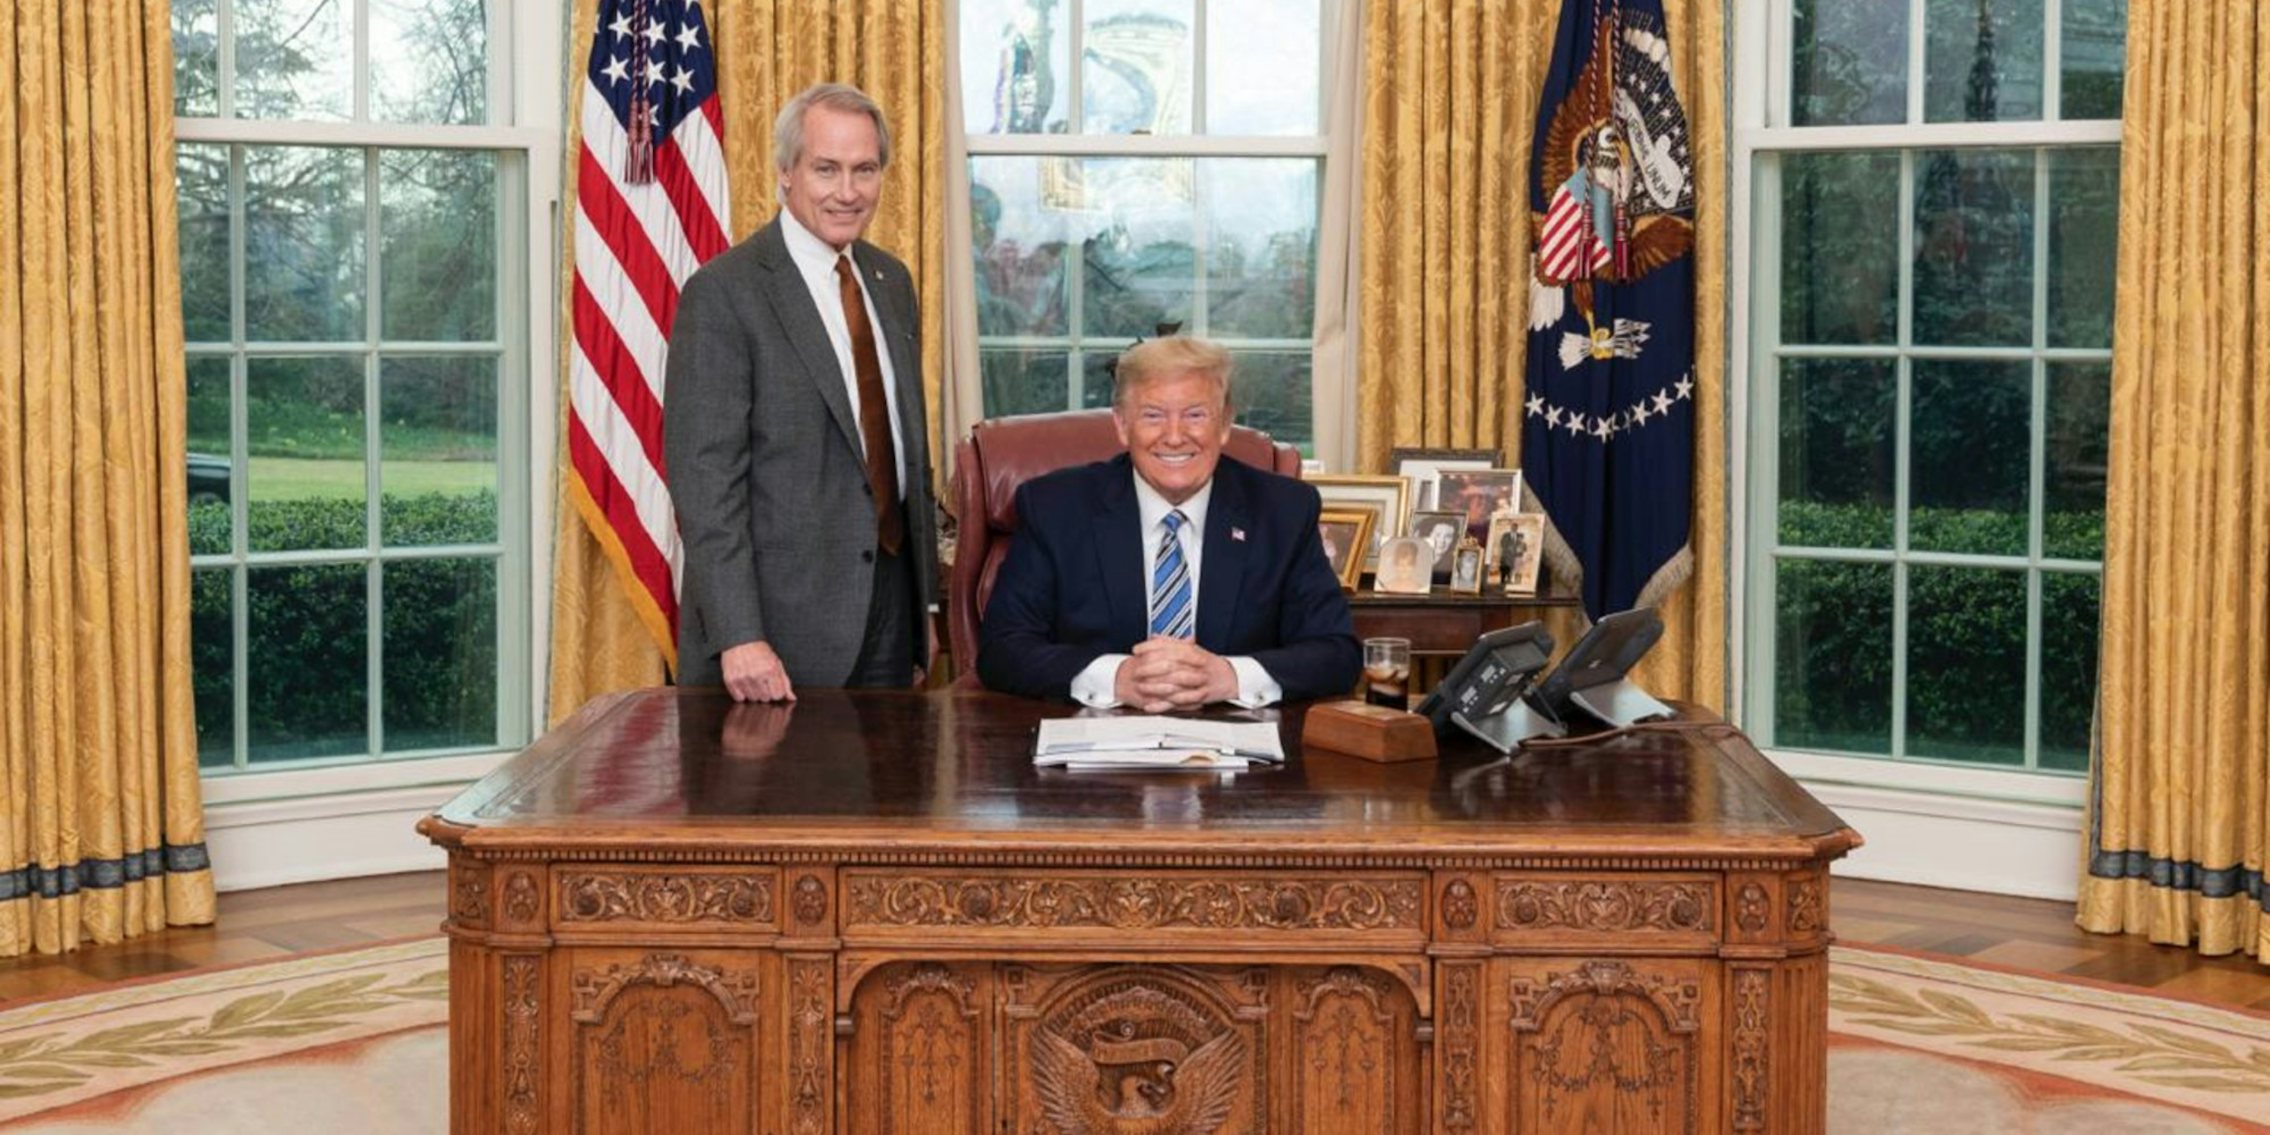 Attorney Lin Wood and ex-President Donald Trump